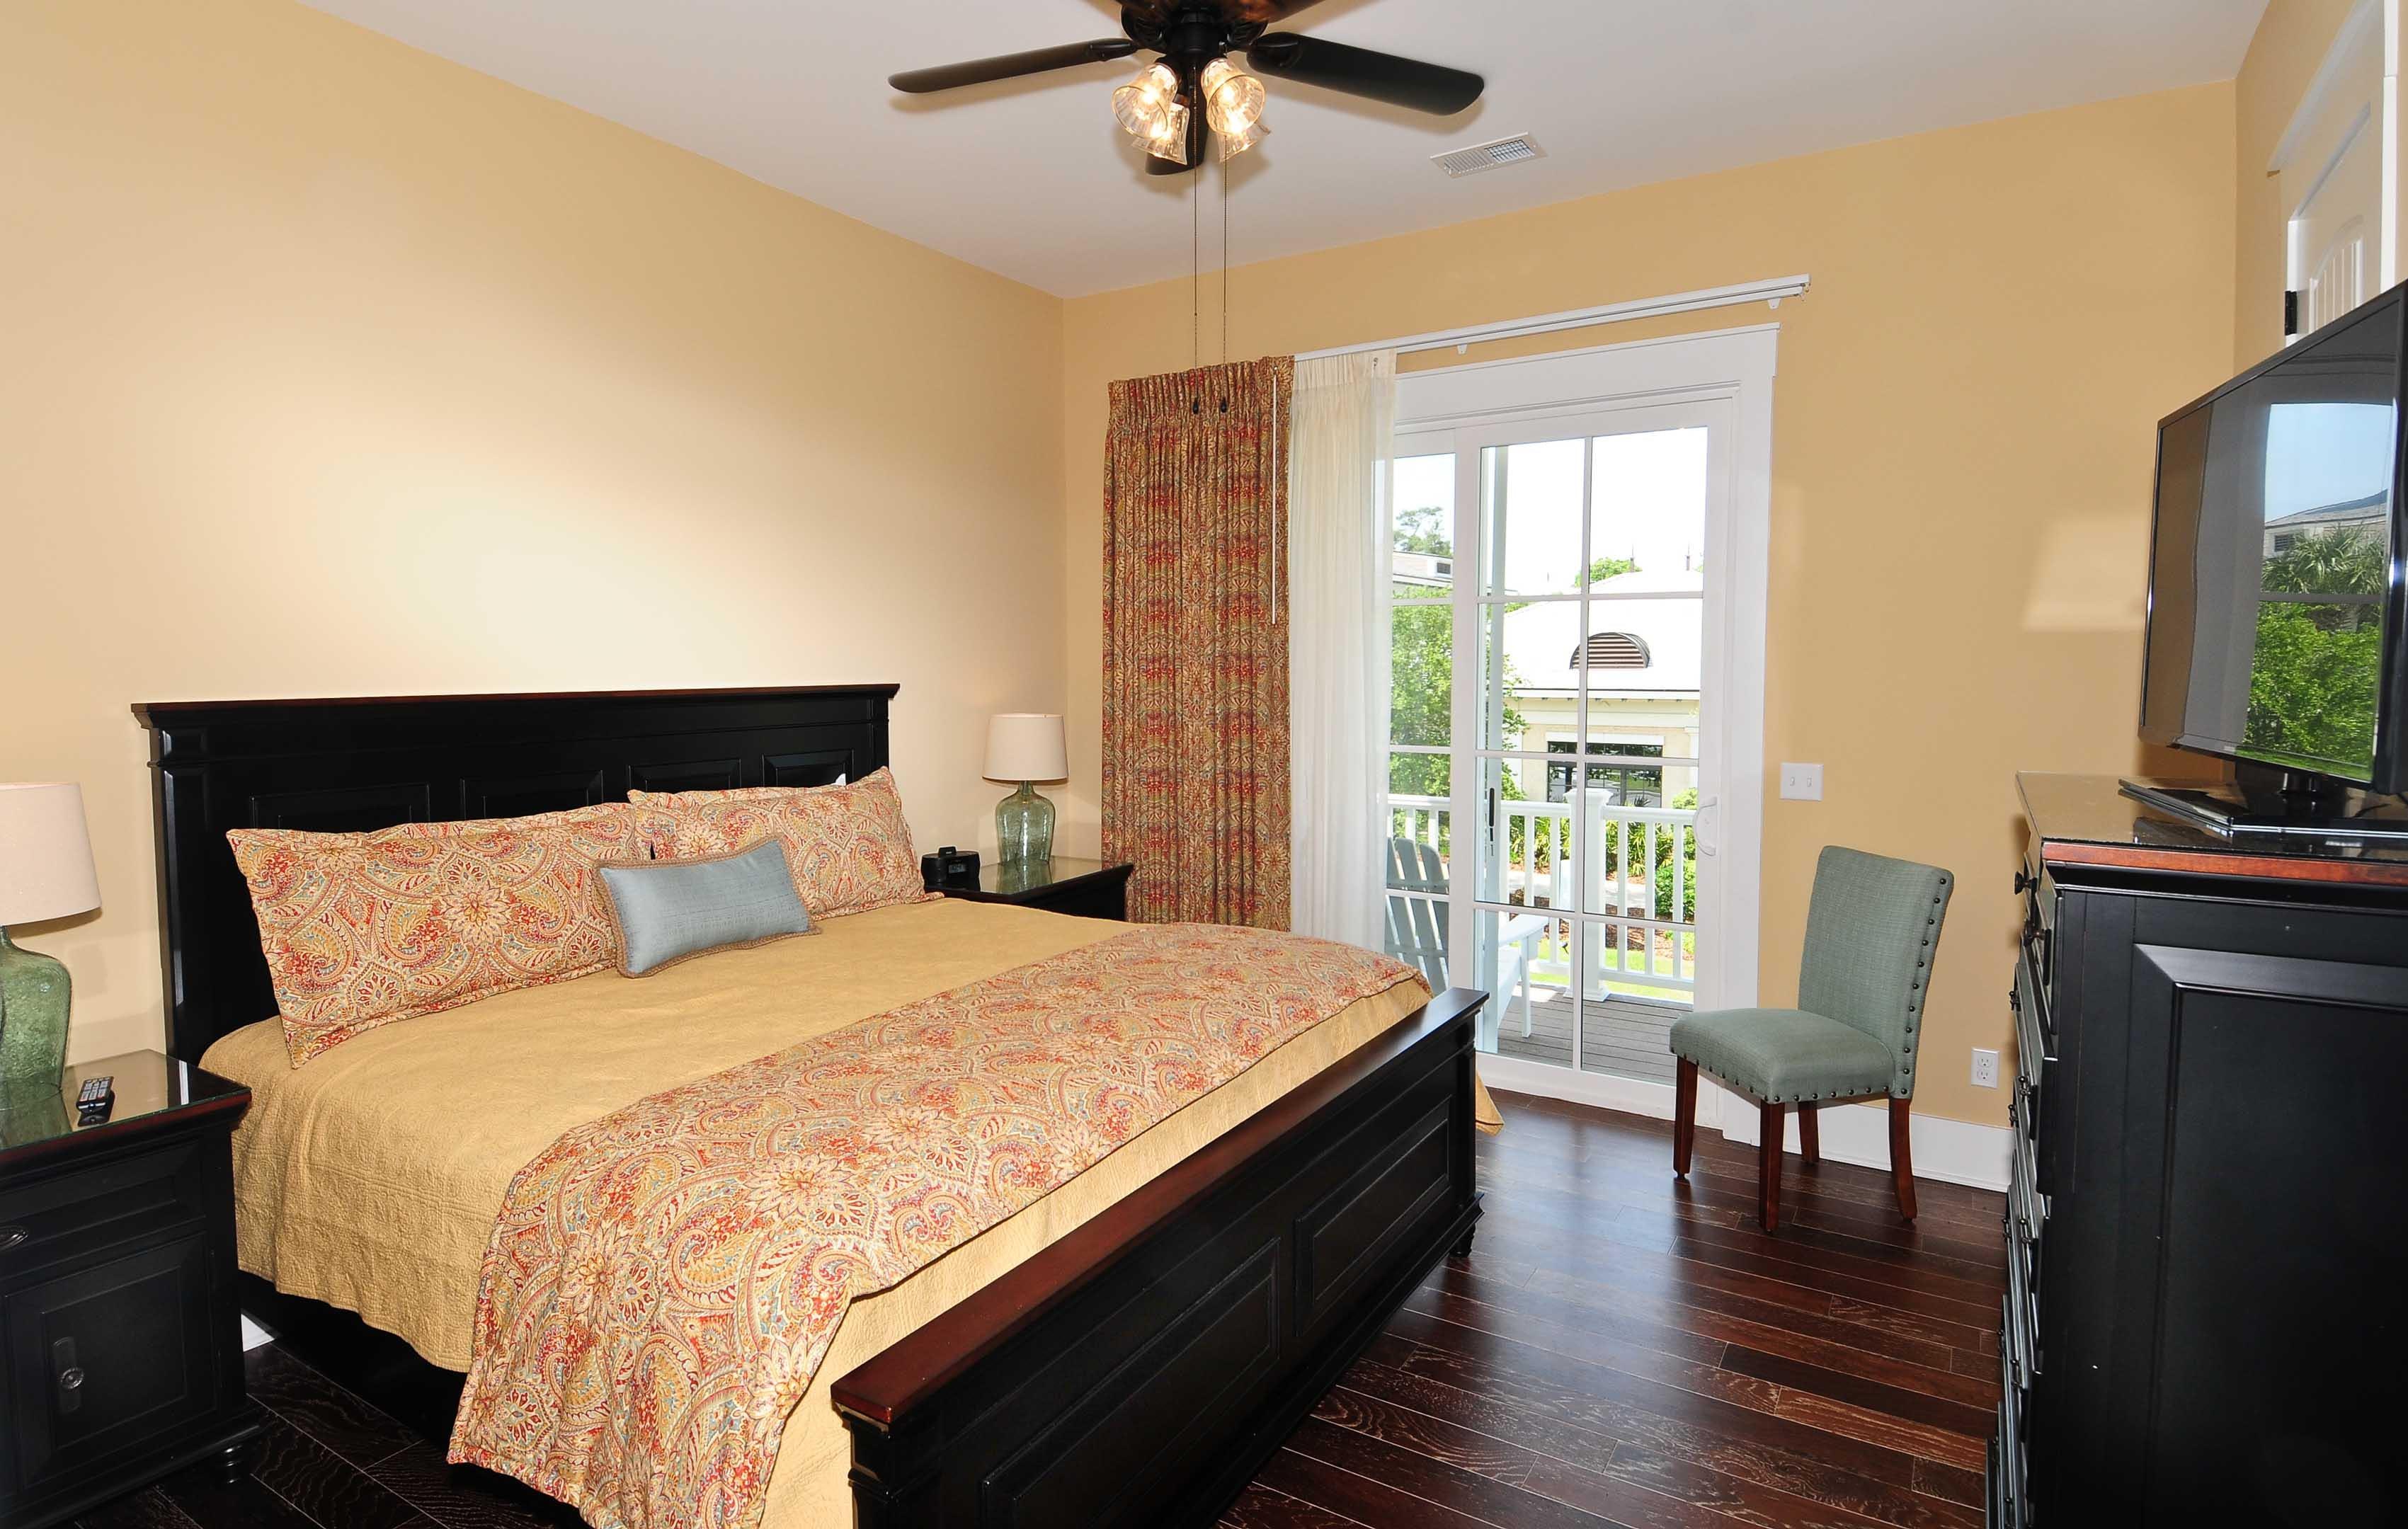 North Beach Cottages - 1 Bedroom Luxury Flat